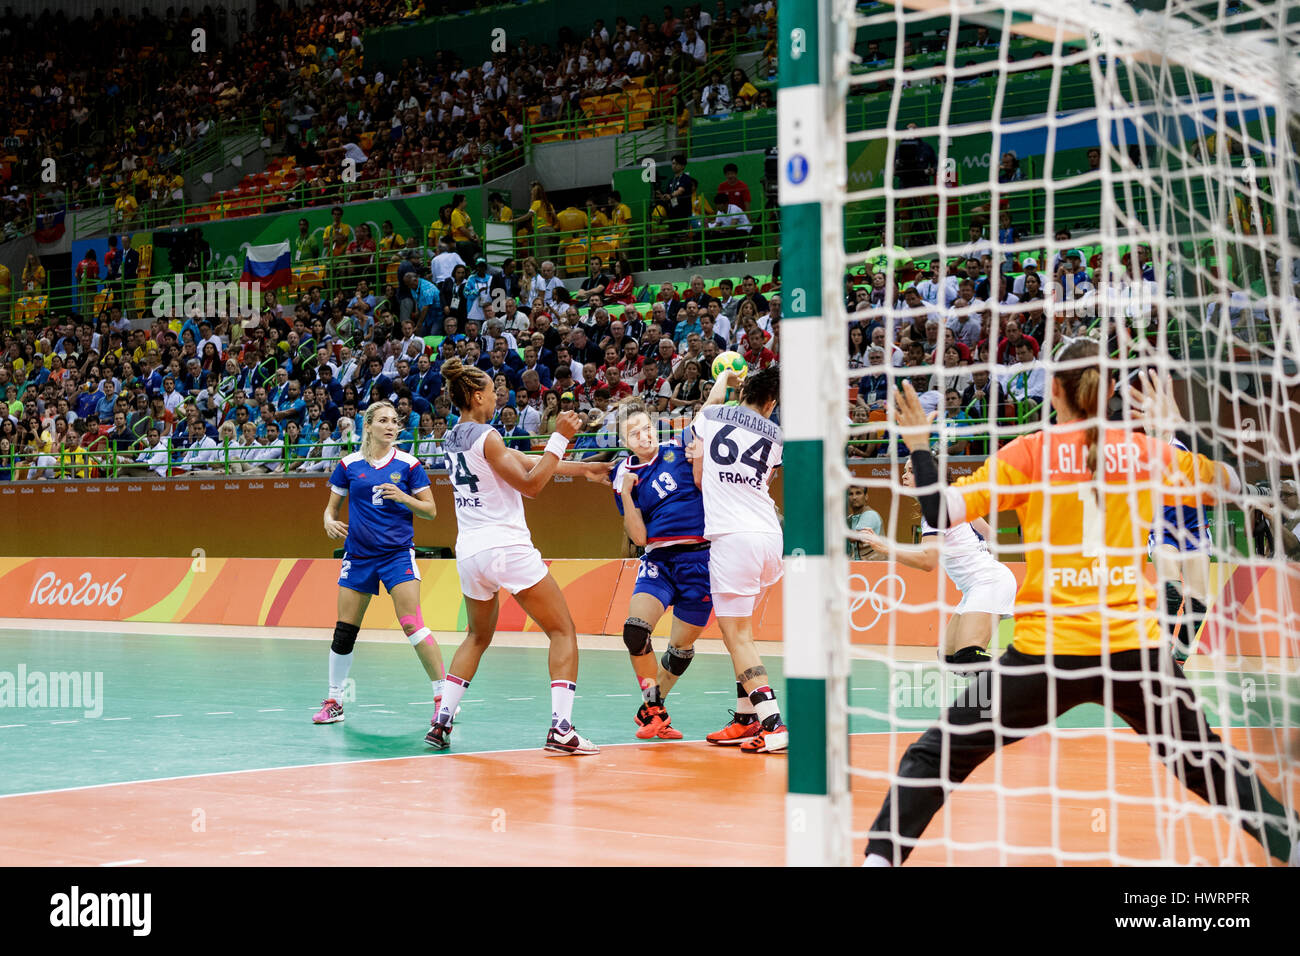 Rio de Janeiro, Brazil. 20 August 2016  Anna Vyakhireva (RUS) #13 defended by Béatrice Edwige (FRA) #24 and Alexandra Lacrabère (FRA) #64 in the women Stock Photo